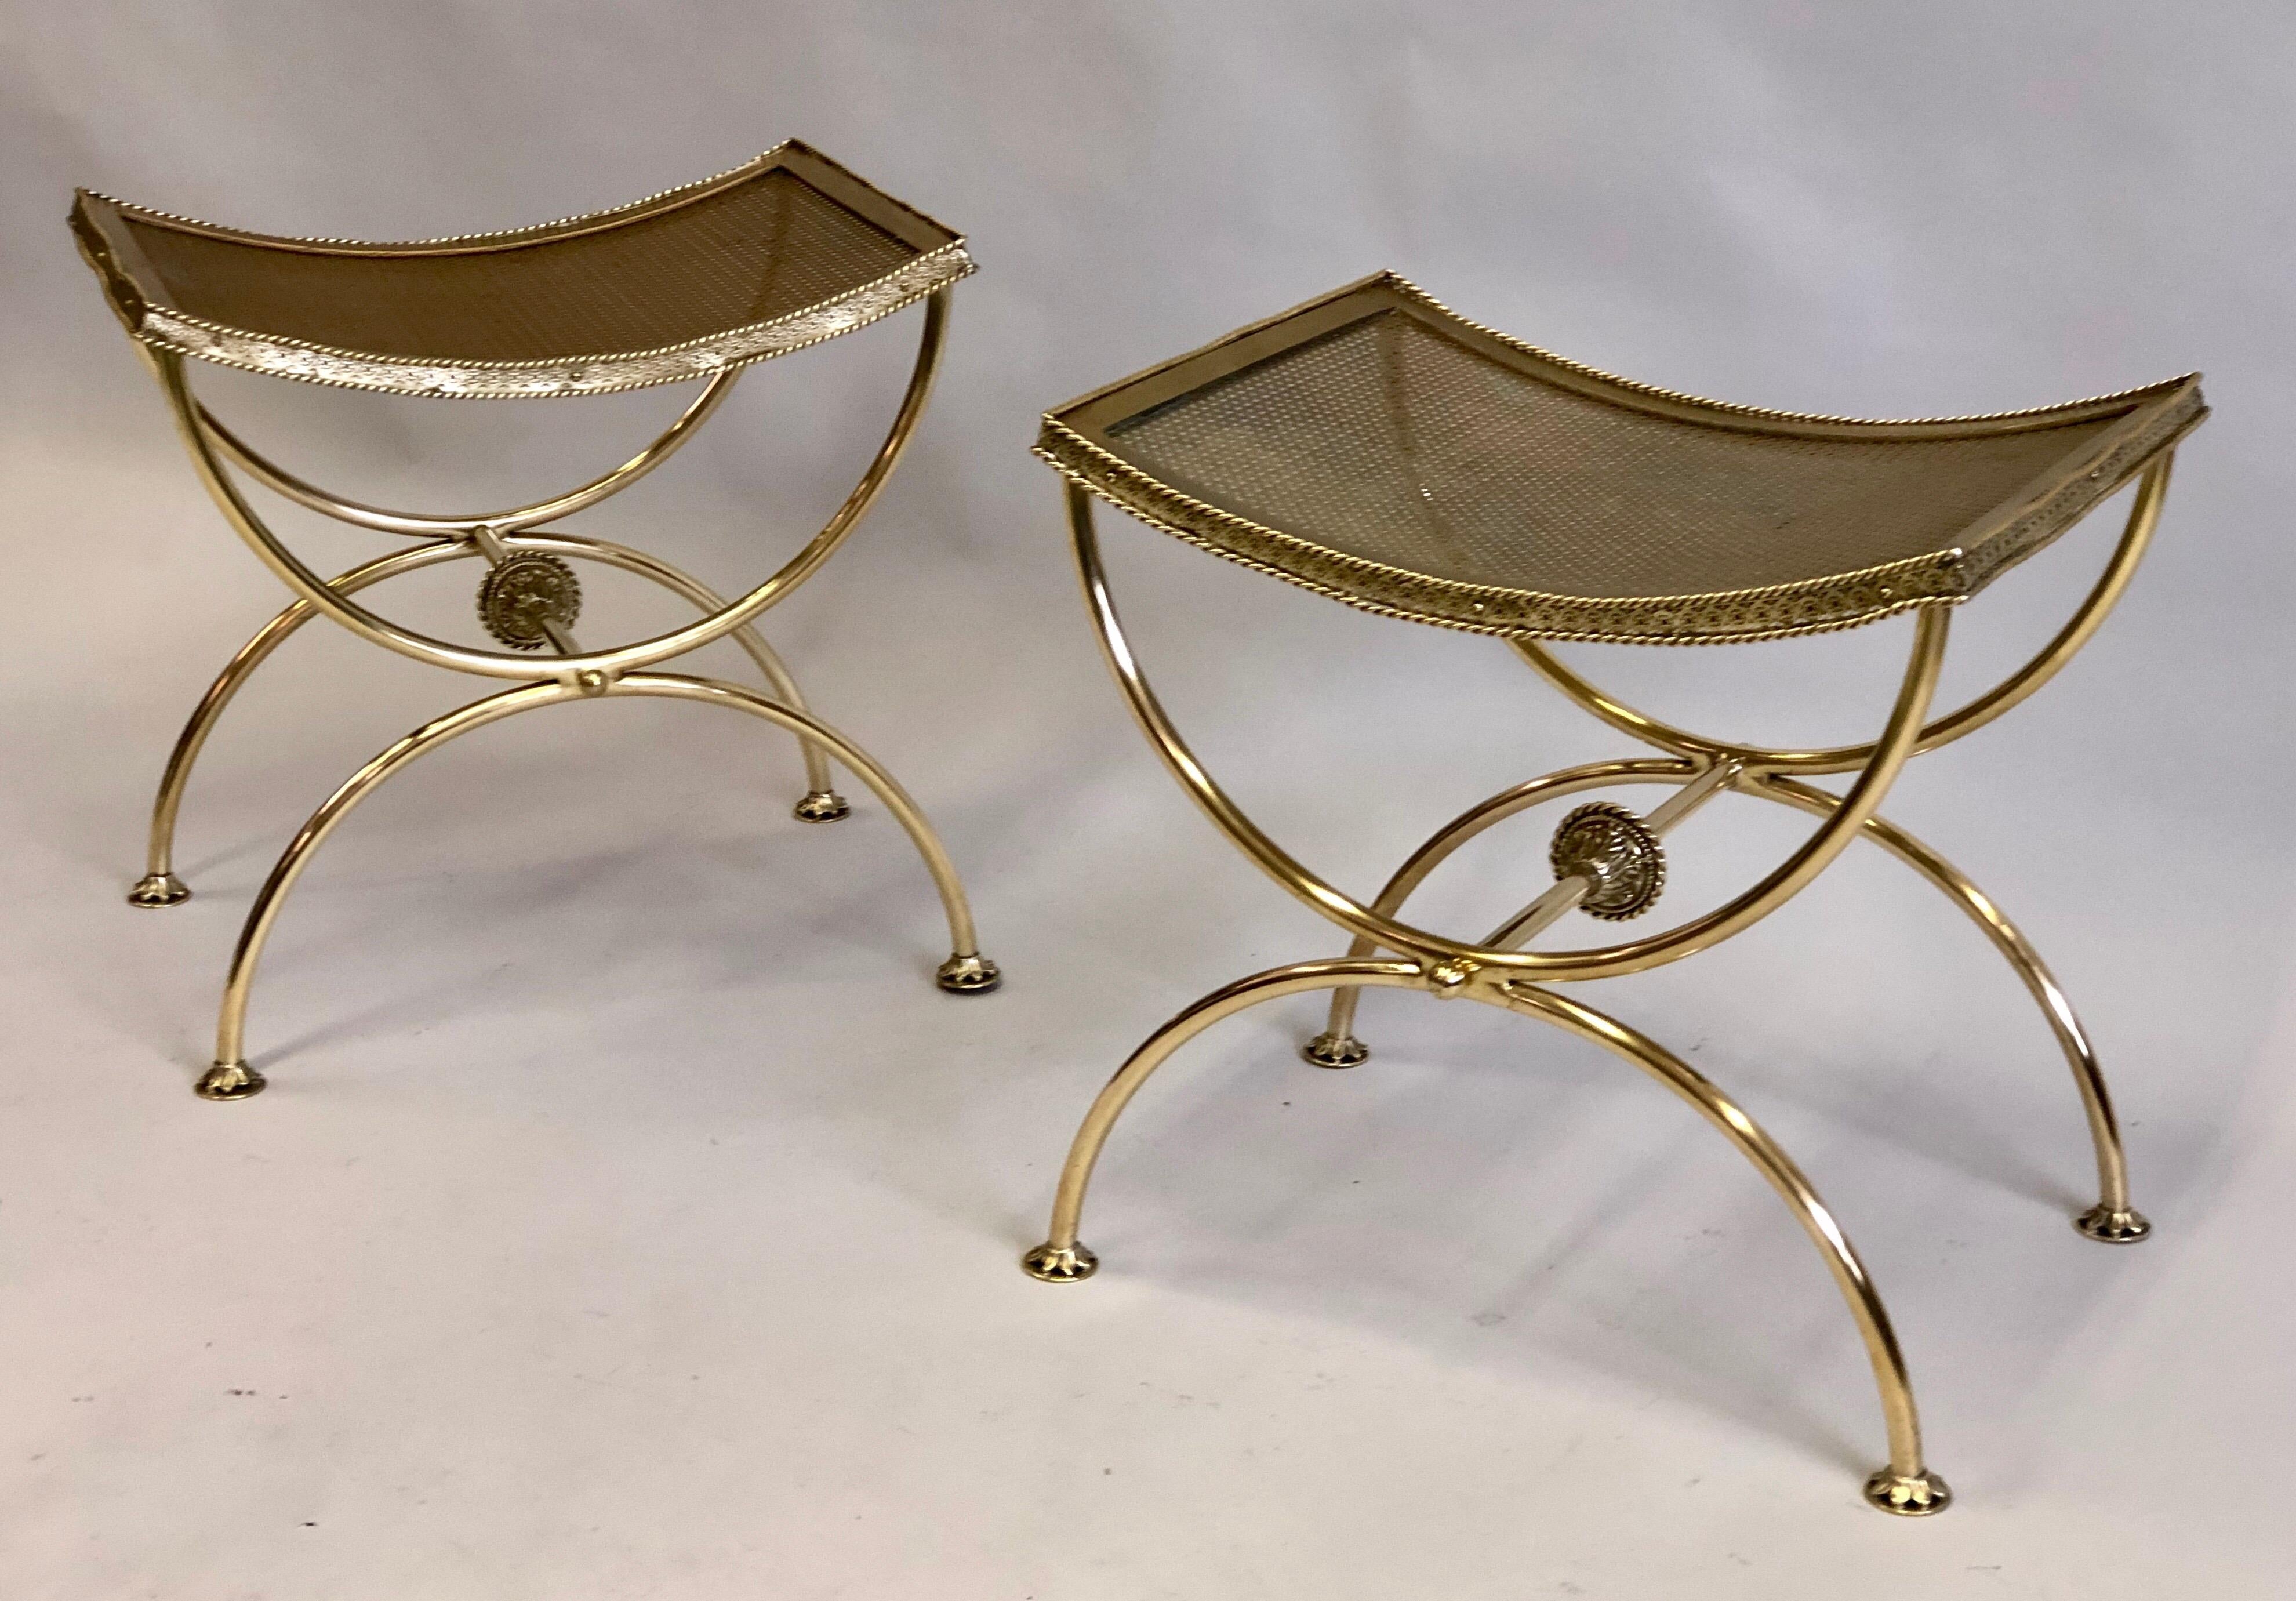 Elegant Pair of French Mid-Century Modern Neoclassical Gilt Bronze / Solid Brass Benches or Stools by Maison Bagues.
The pieces feature a classical Curile or X-frame leg structure which supports a shaped seat for comfort. Ball finials complete the